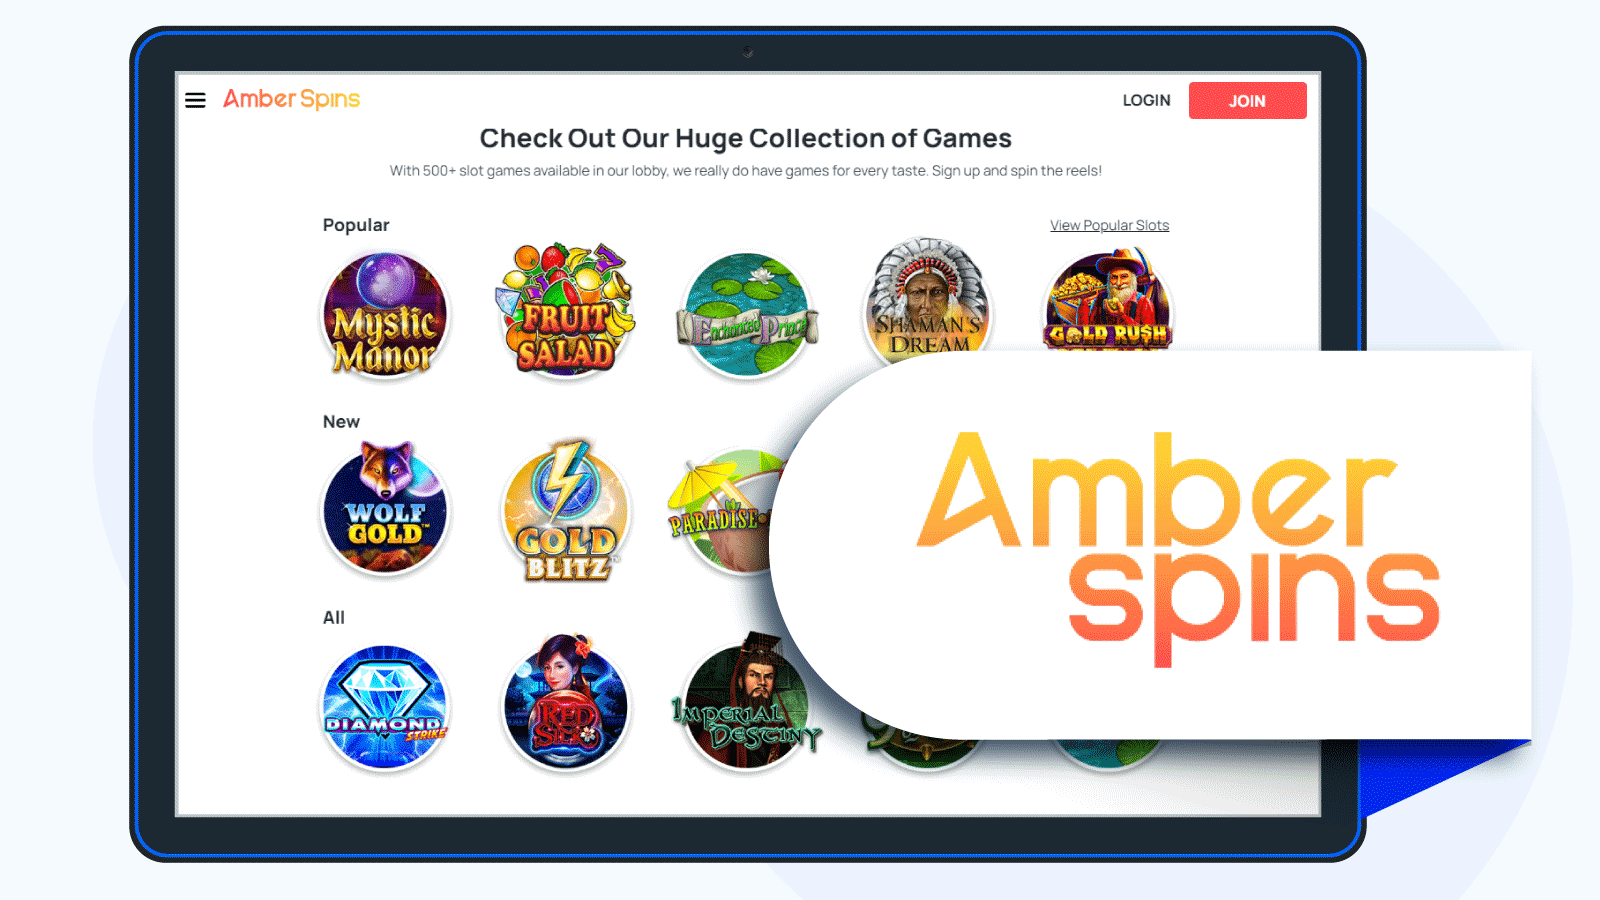 Amber Spins Casino - Most Extensive Slots Gallery